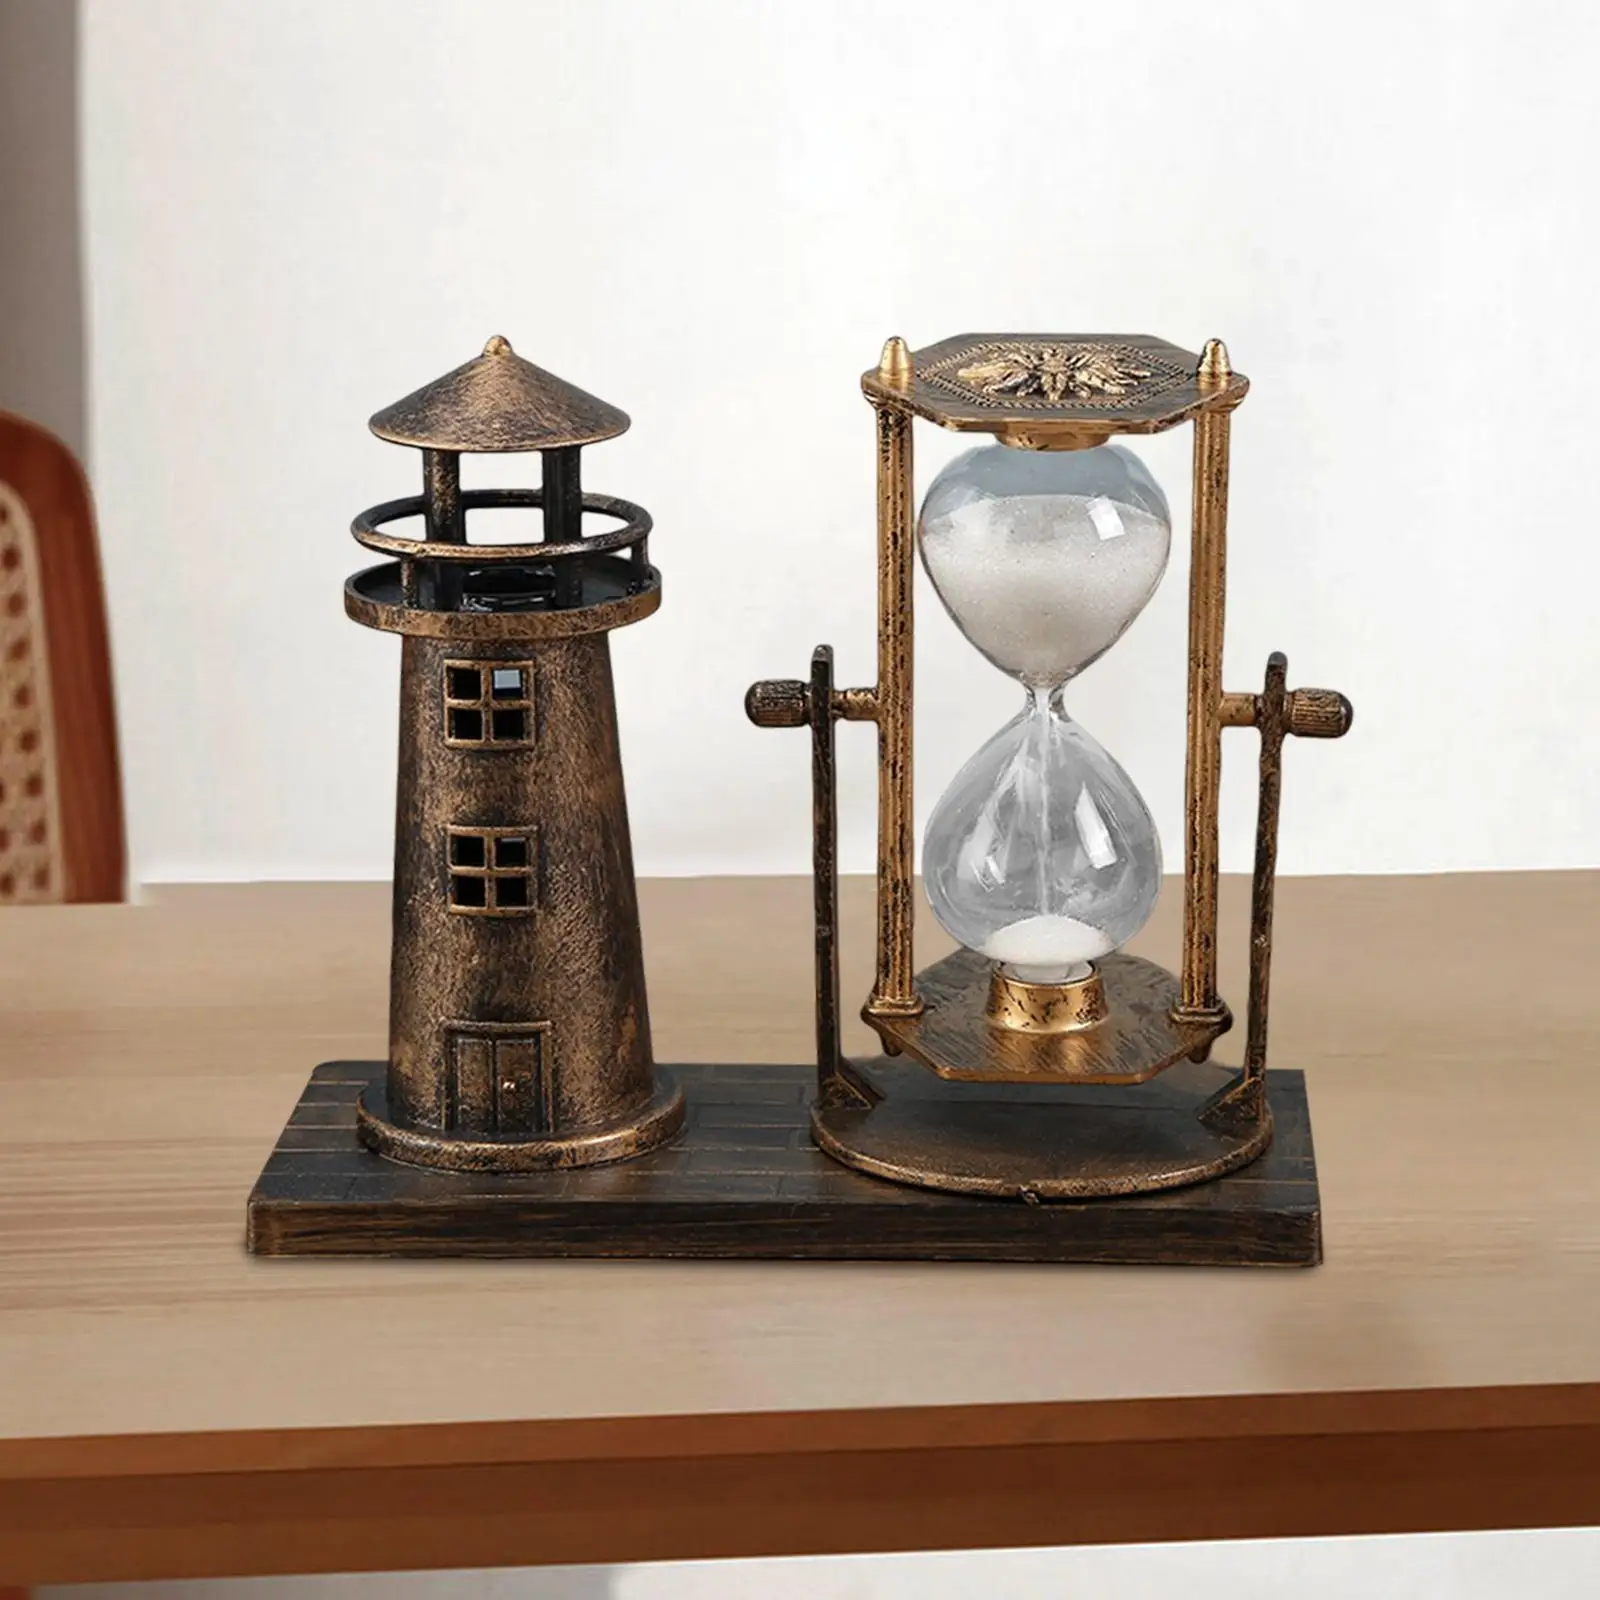 Lighthouse Hourglass Timer Decorations Table Centerpiece Sculpture Ornaments Watchtower for Tabletop Office Housewarming Gift